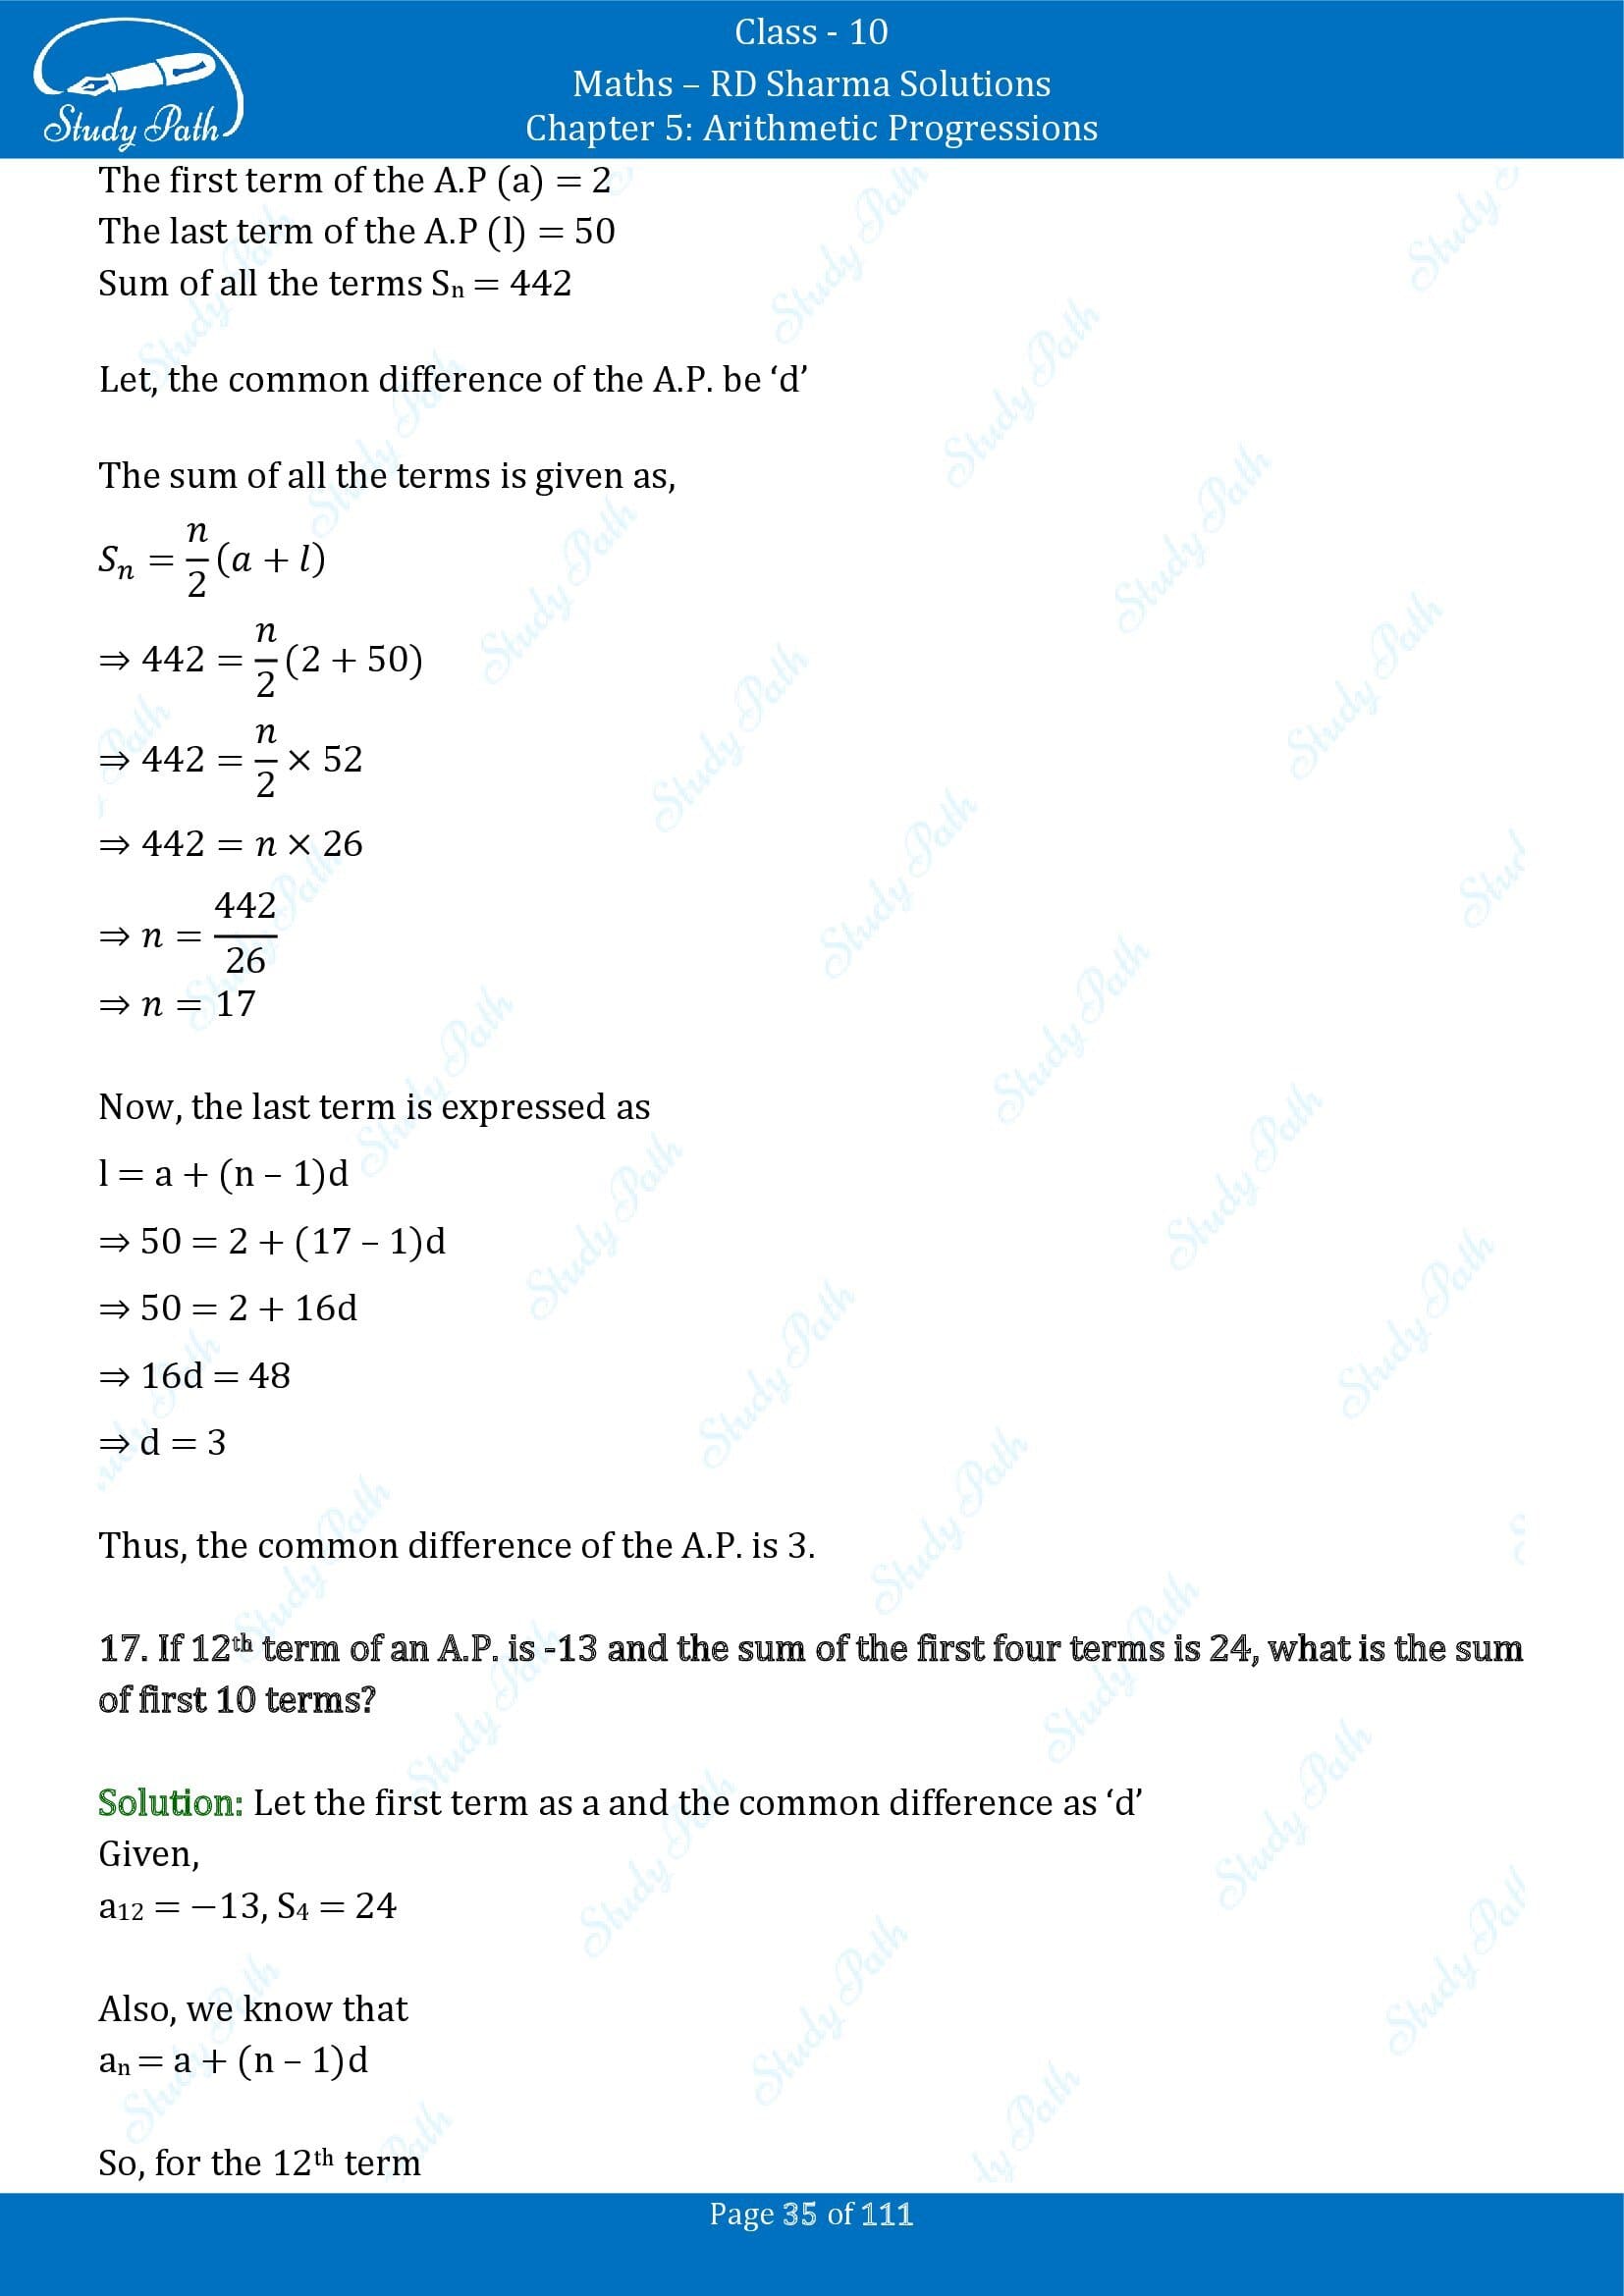 RD Sharma Solutions Class 10 Chapter 5 Arithmetic Progressions Exercise 5.6 00035